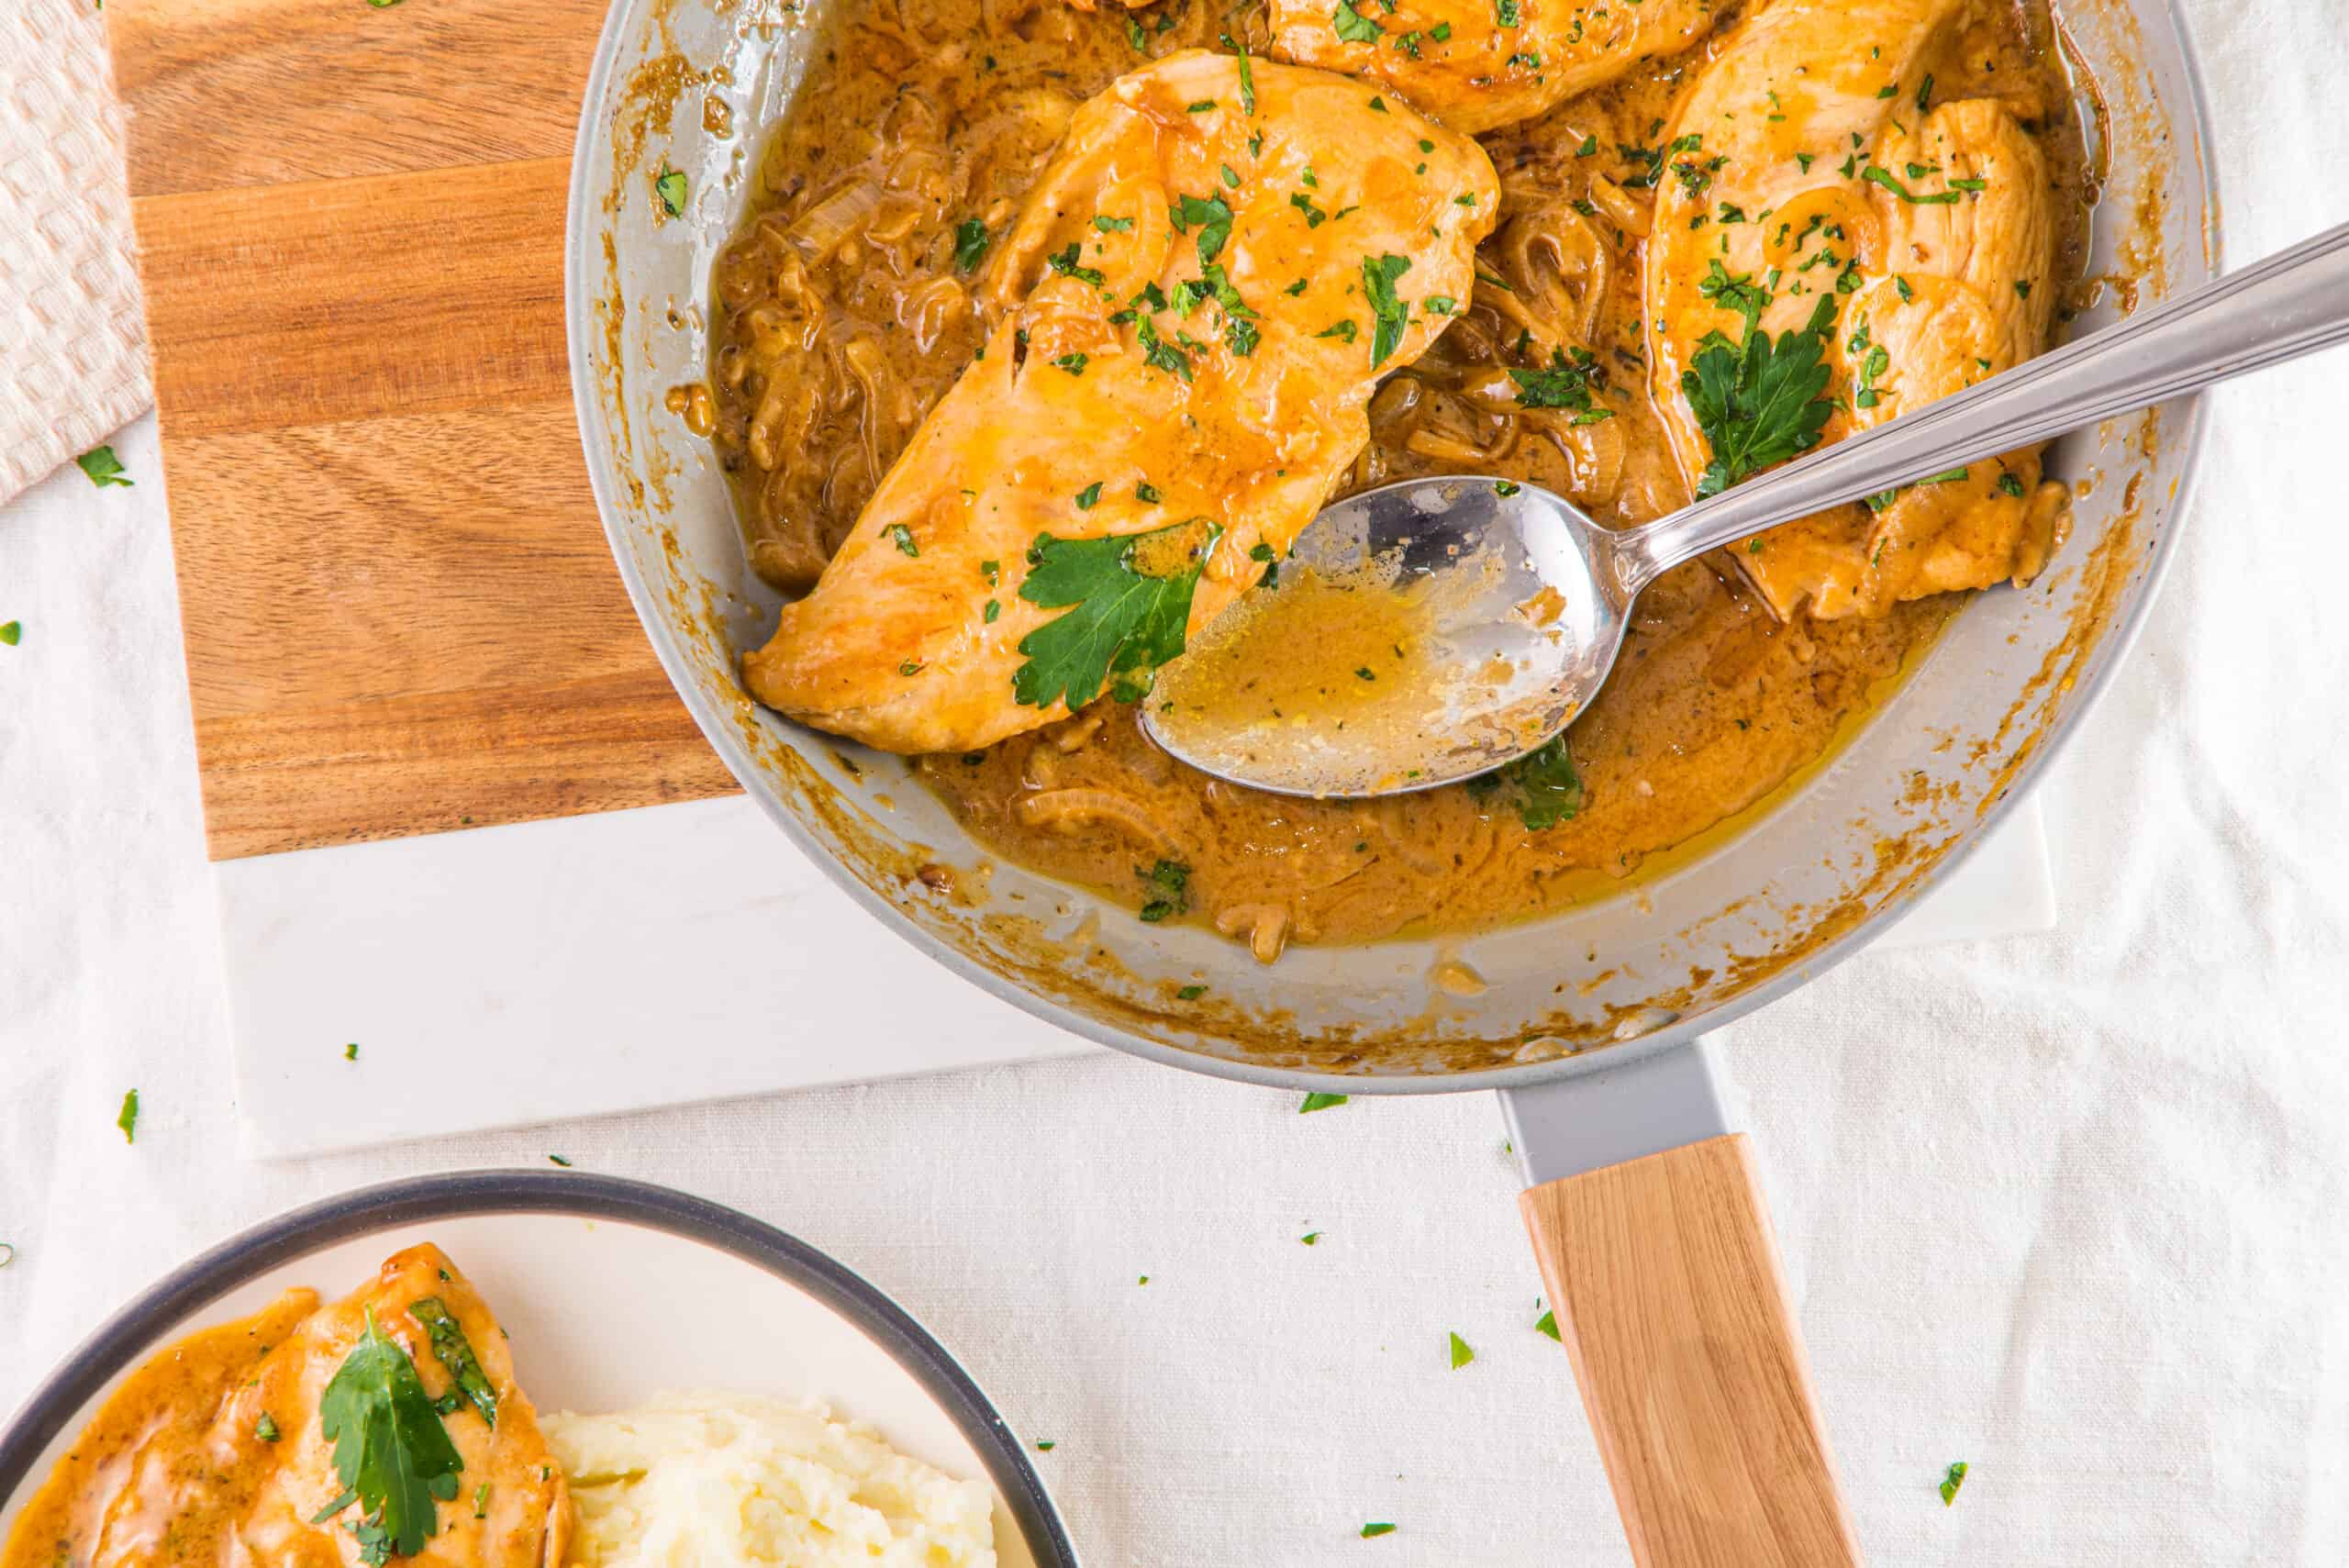 Southern Smothered Chicken
